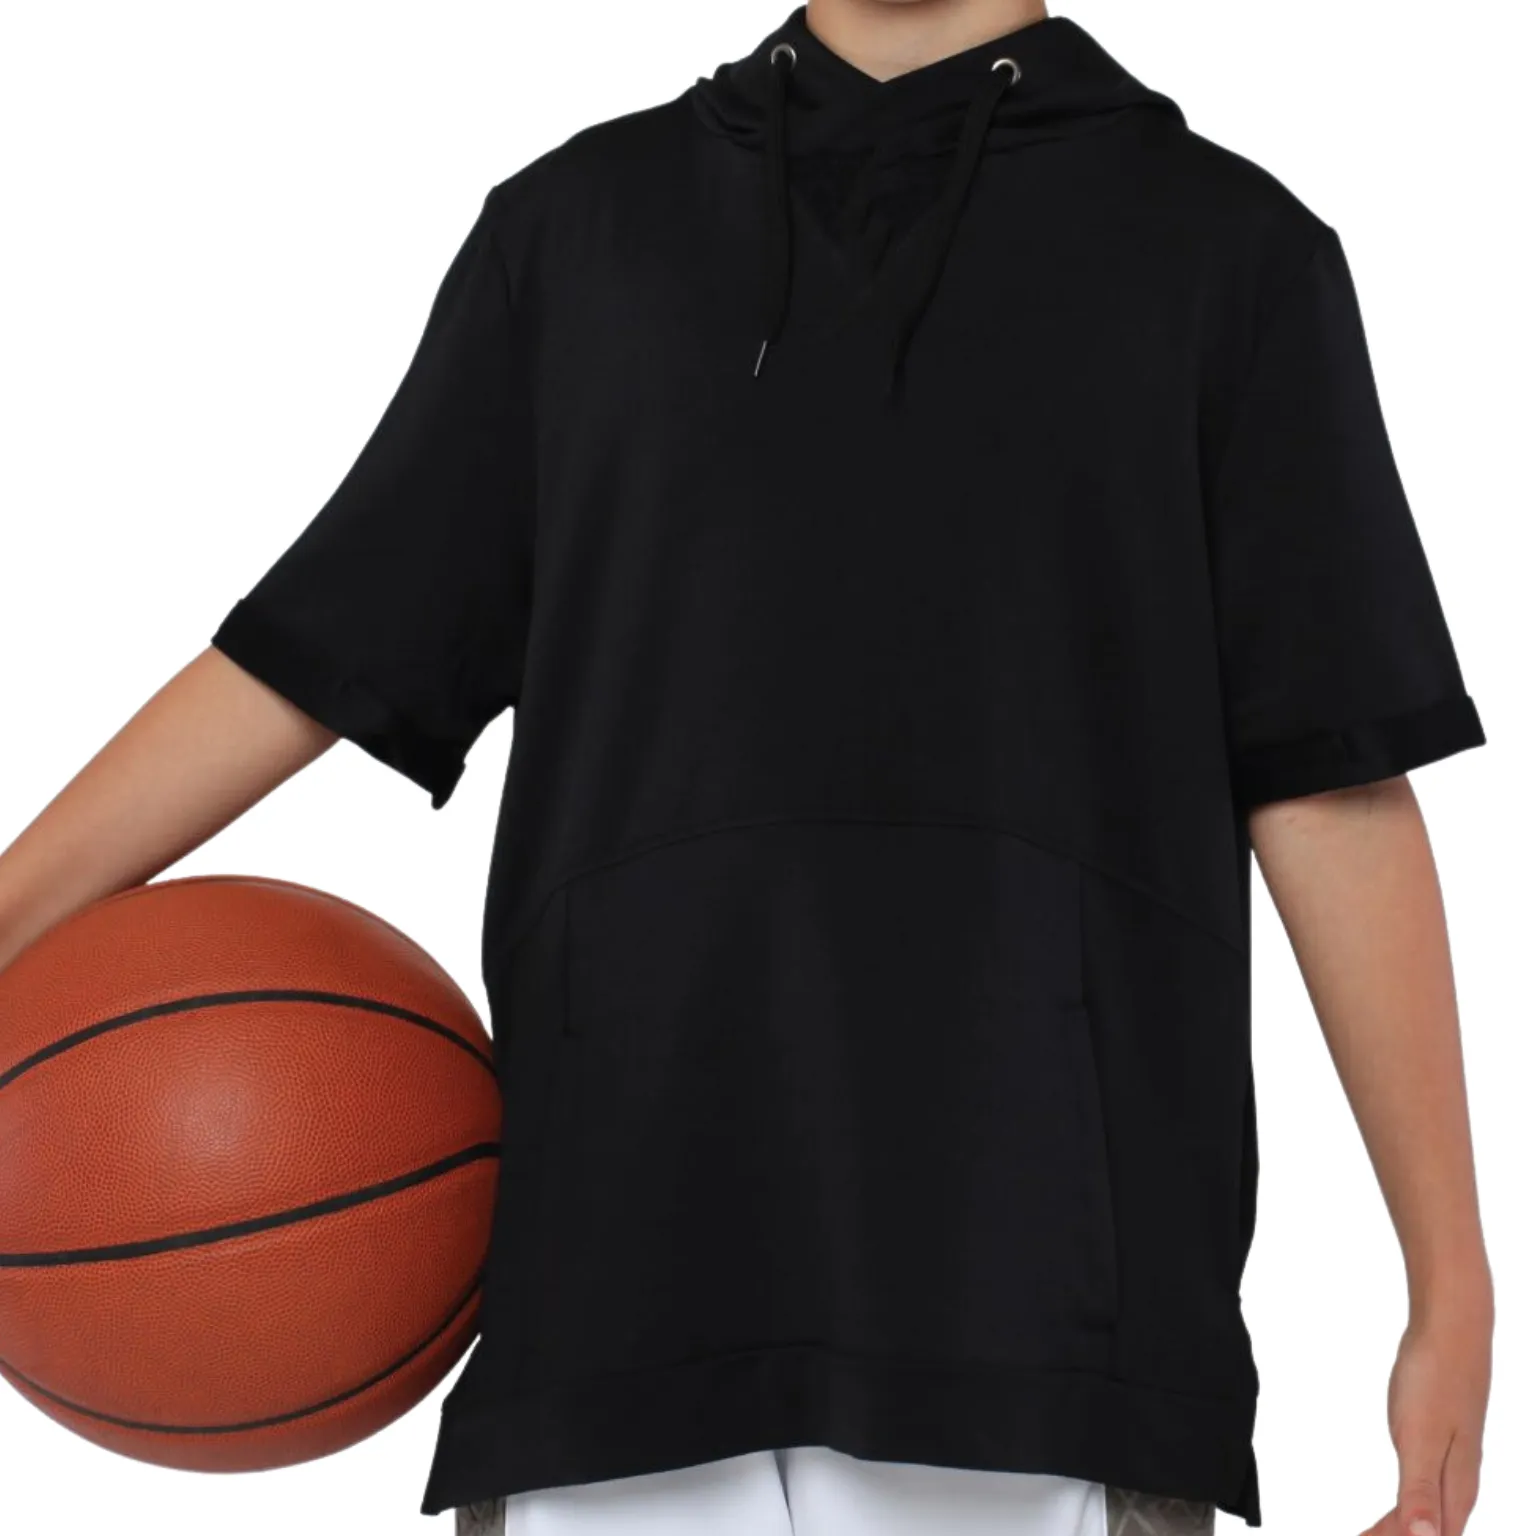 Basketball Hoodie manufacturing with trendy designs